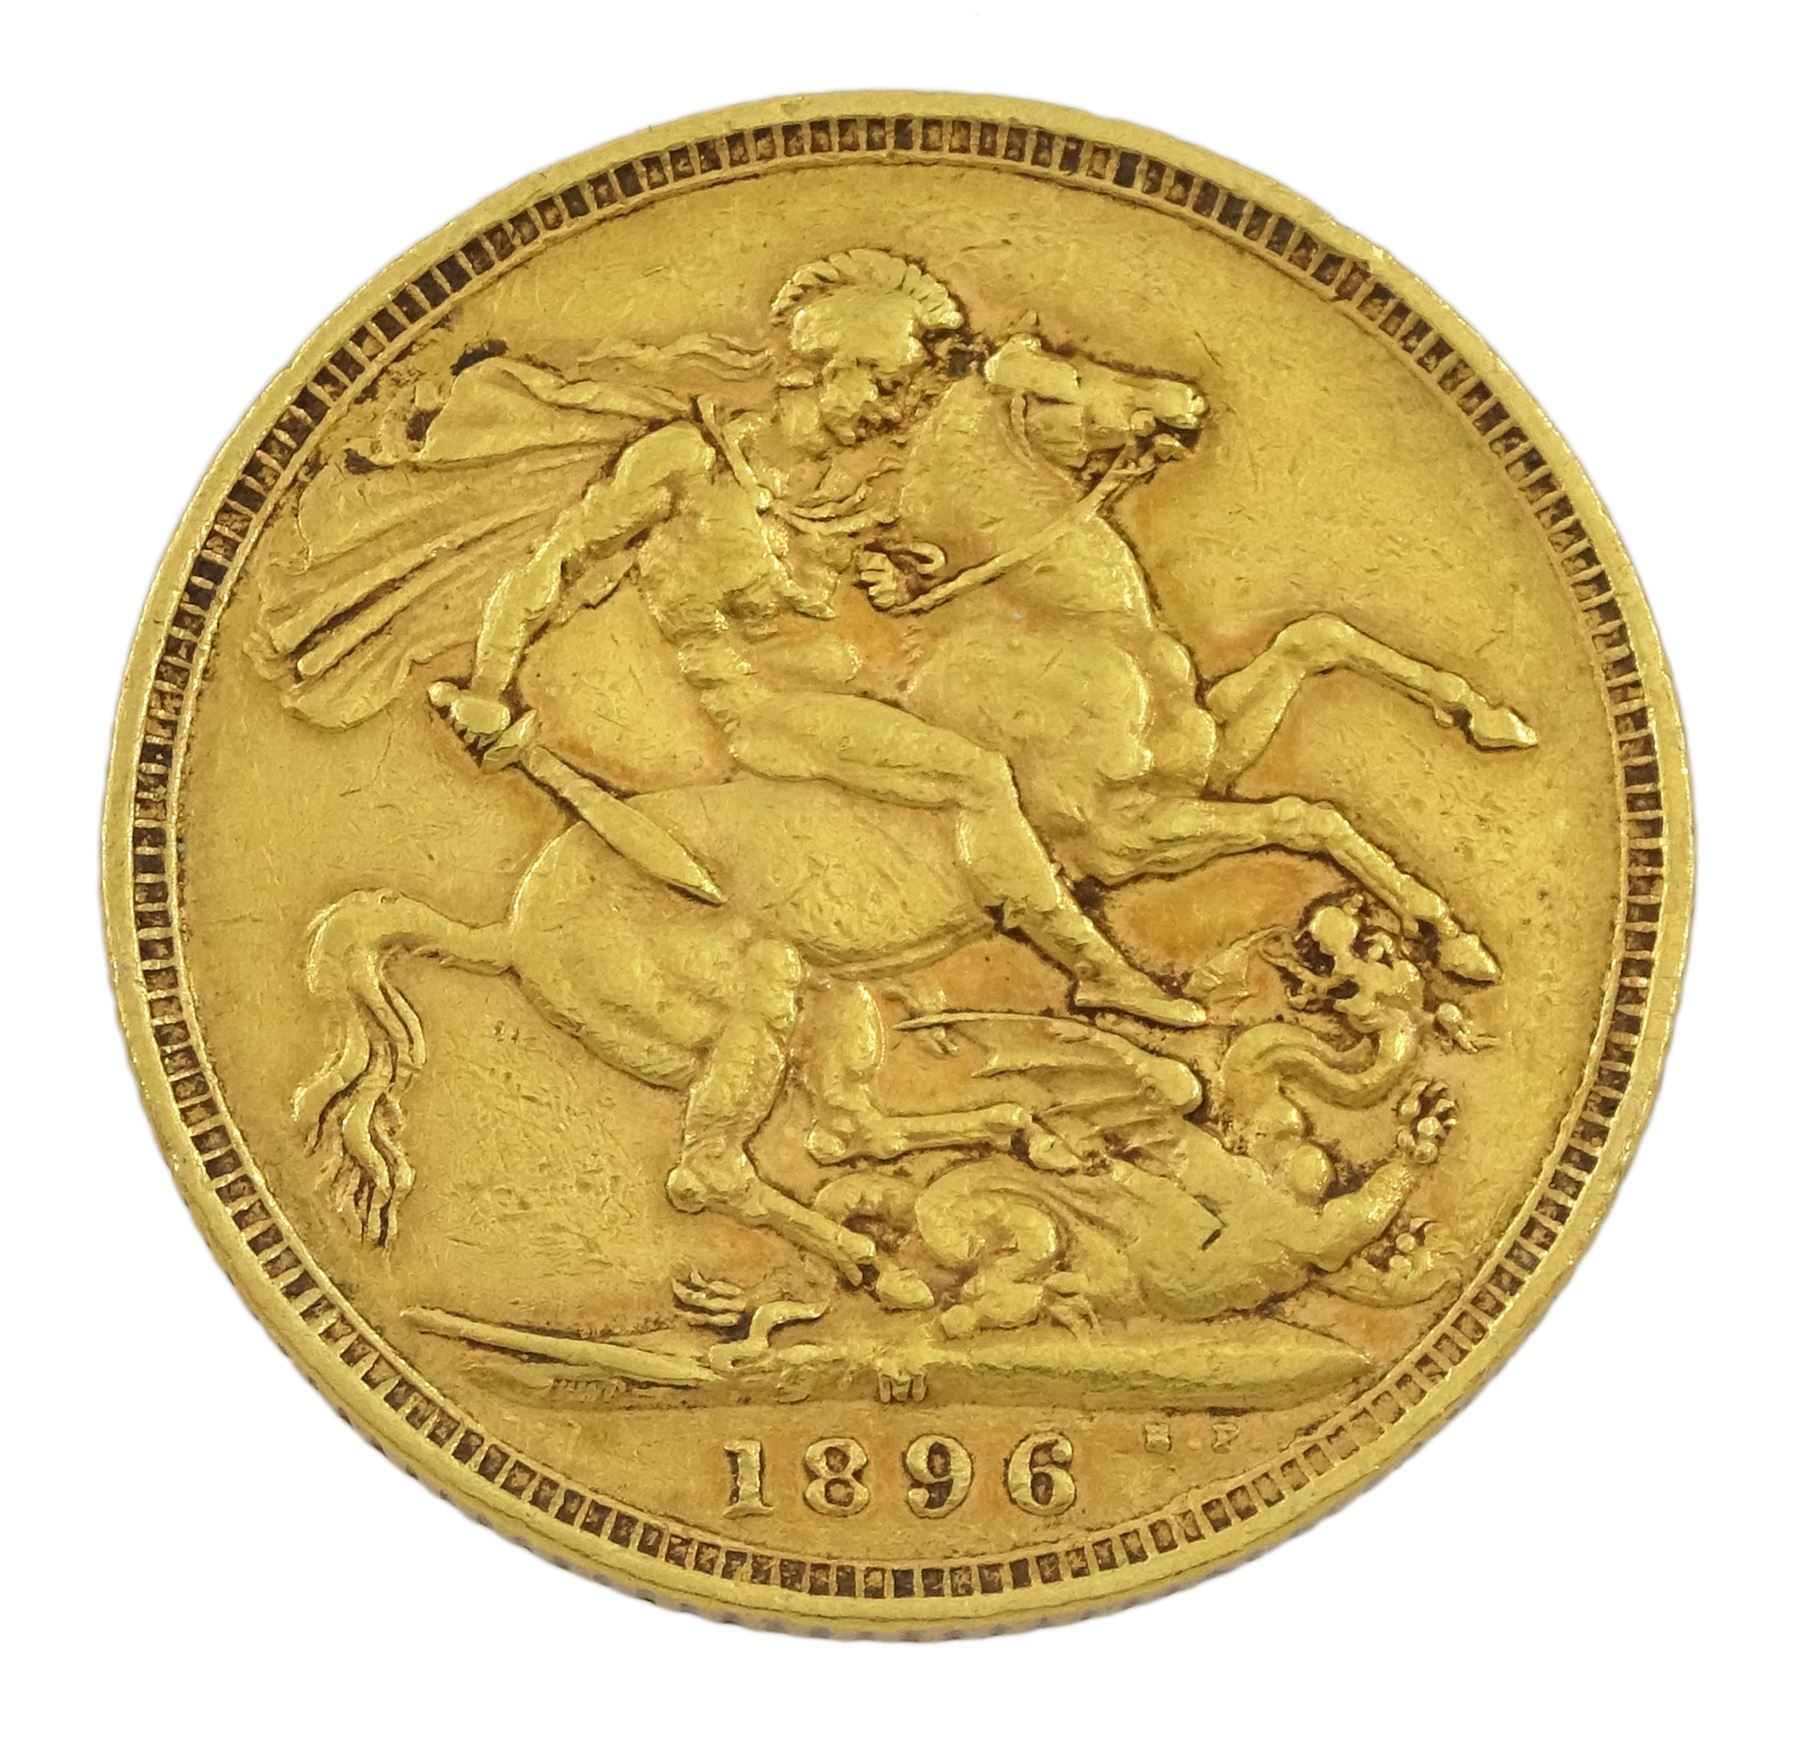 Queen Victoria 1896 gold full sovereign coin - Image 2 of 2